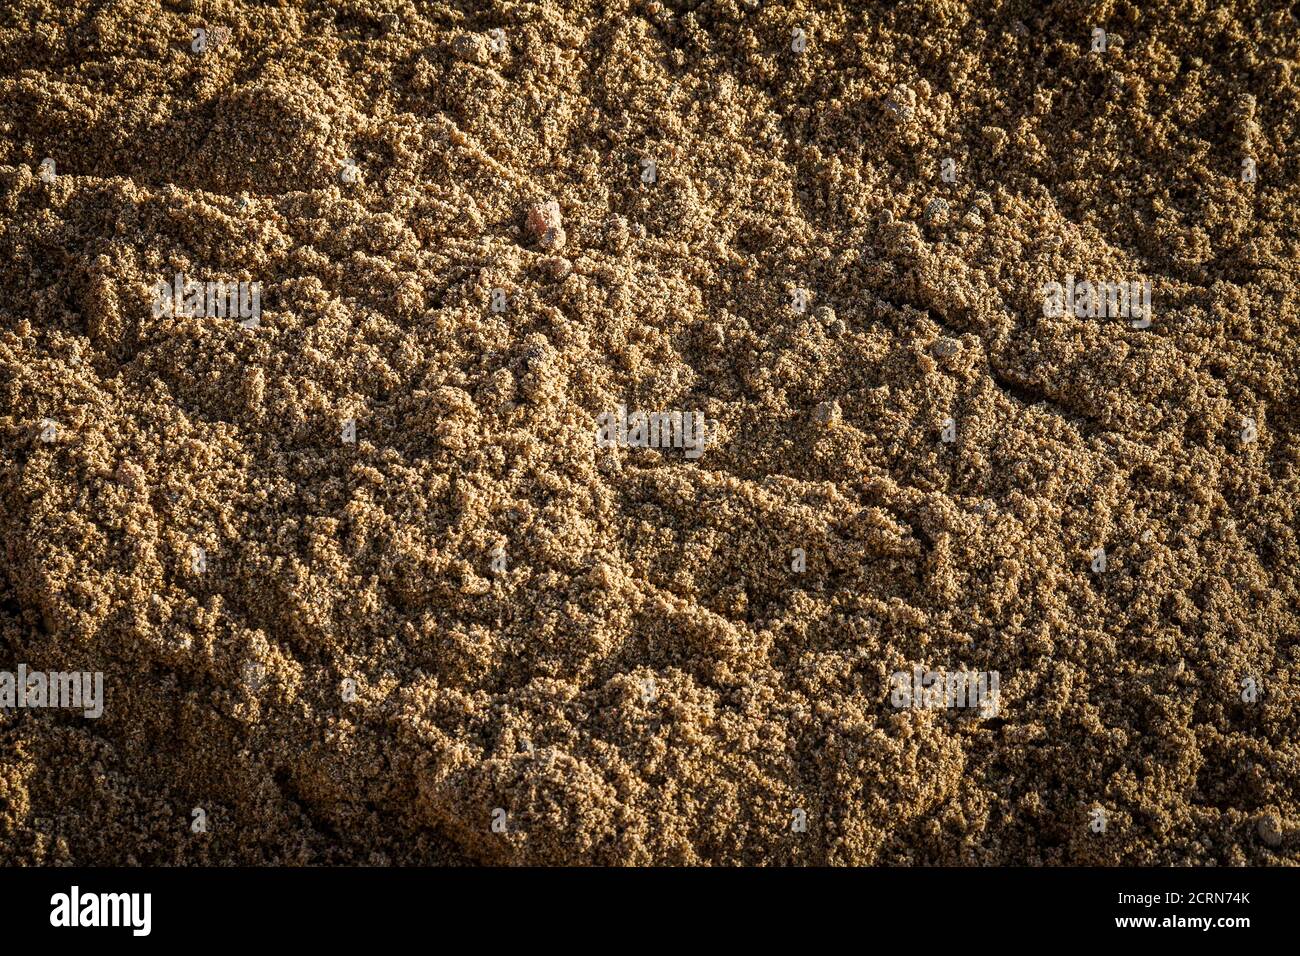 Background of scattered sand fine gravel texture Stock Photo